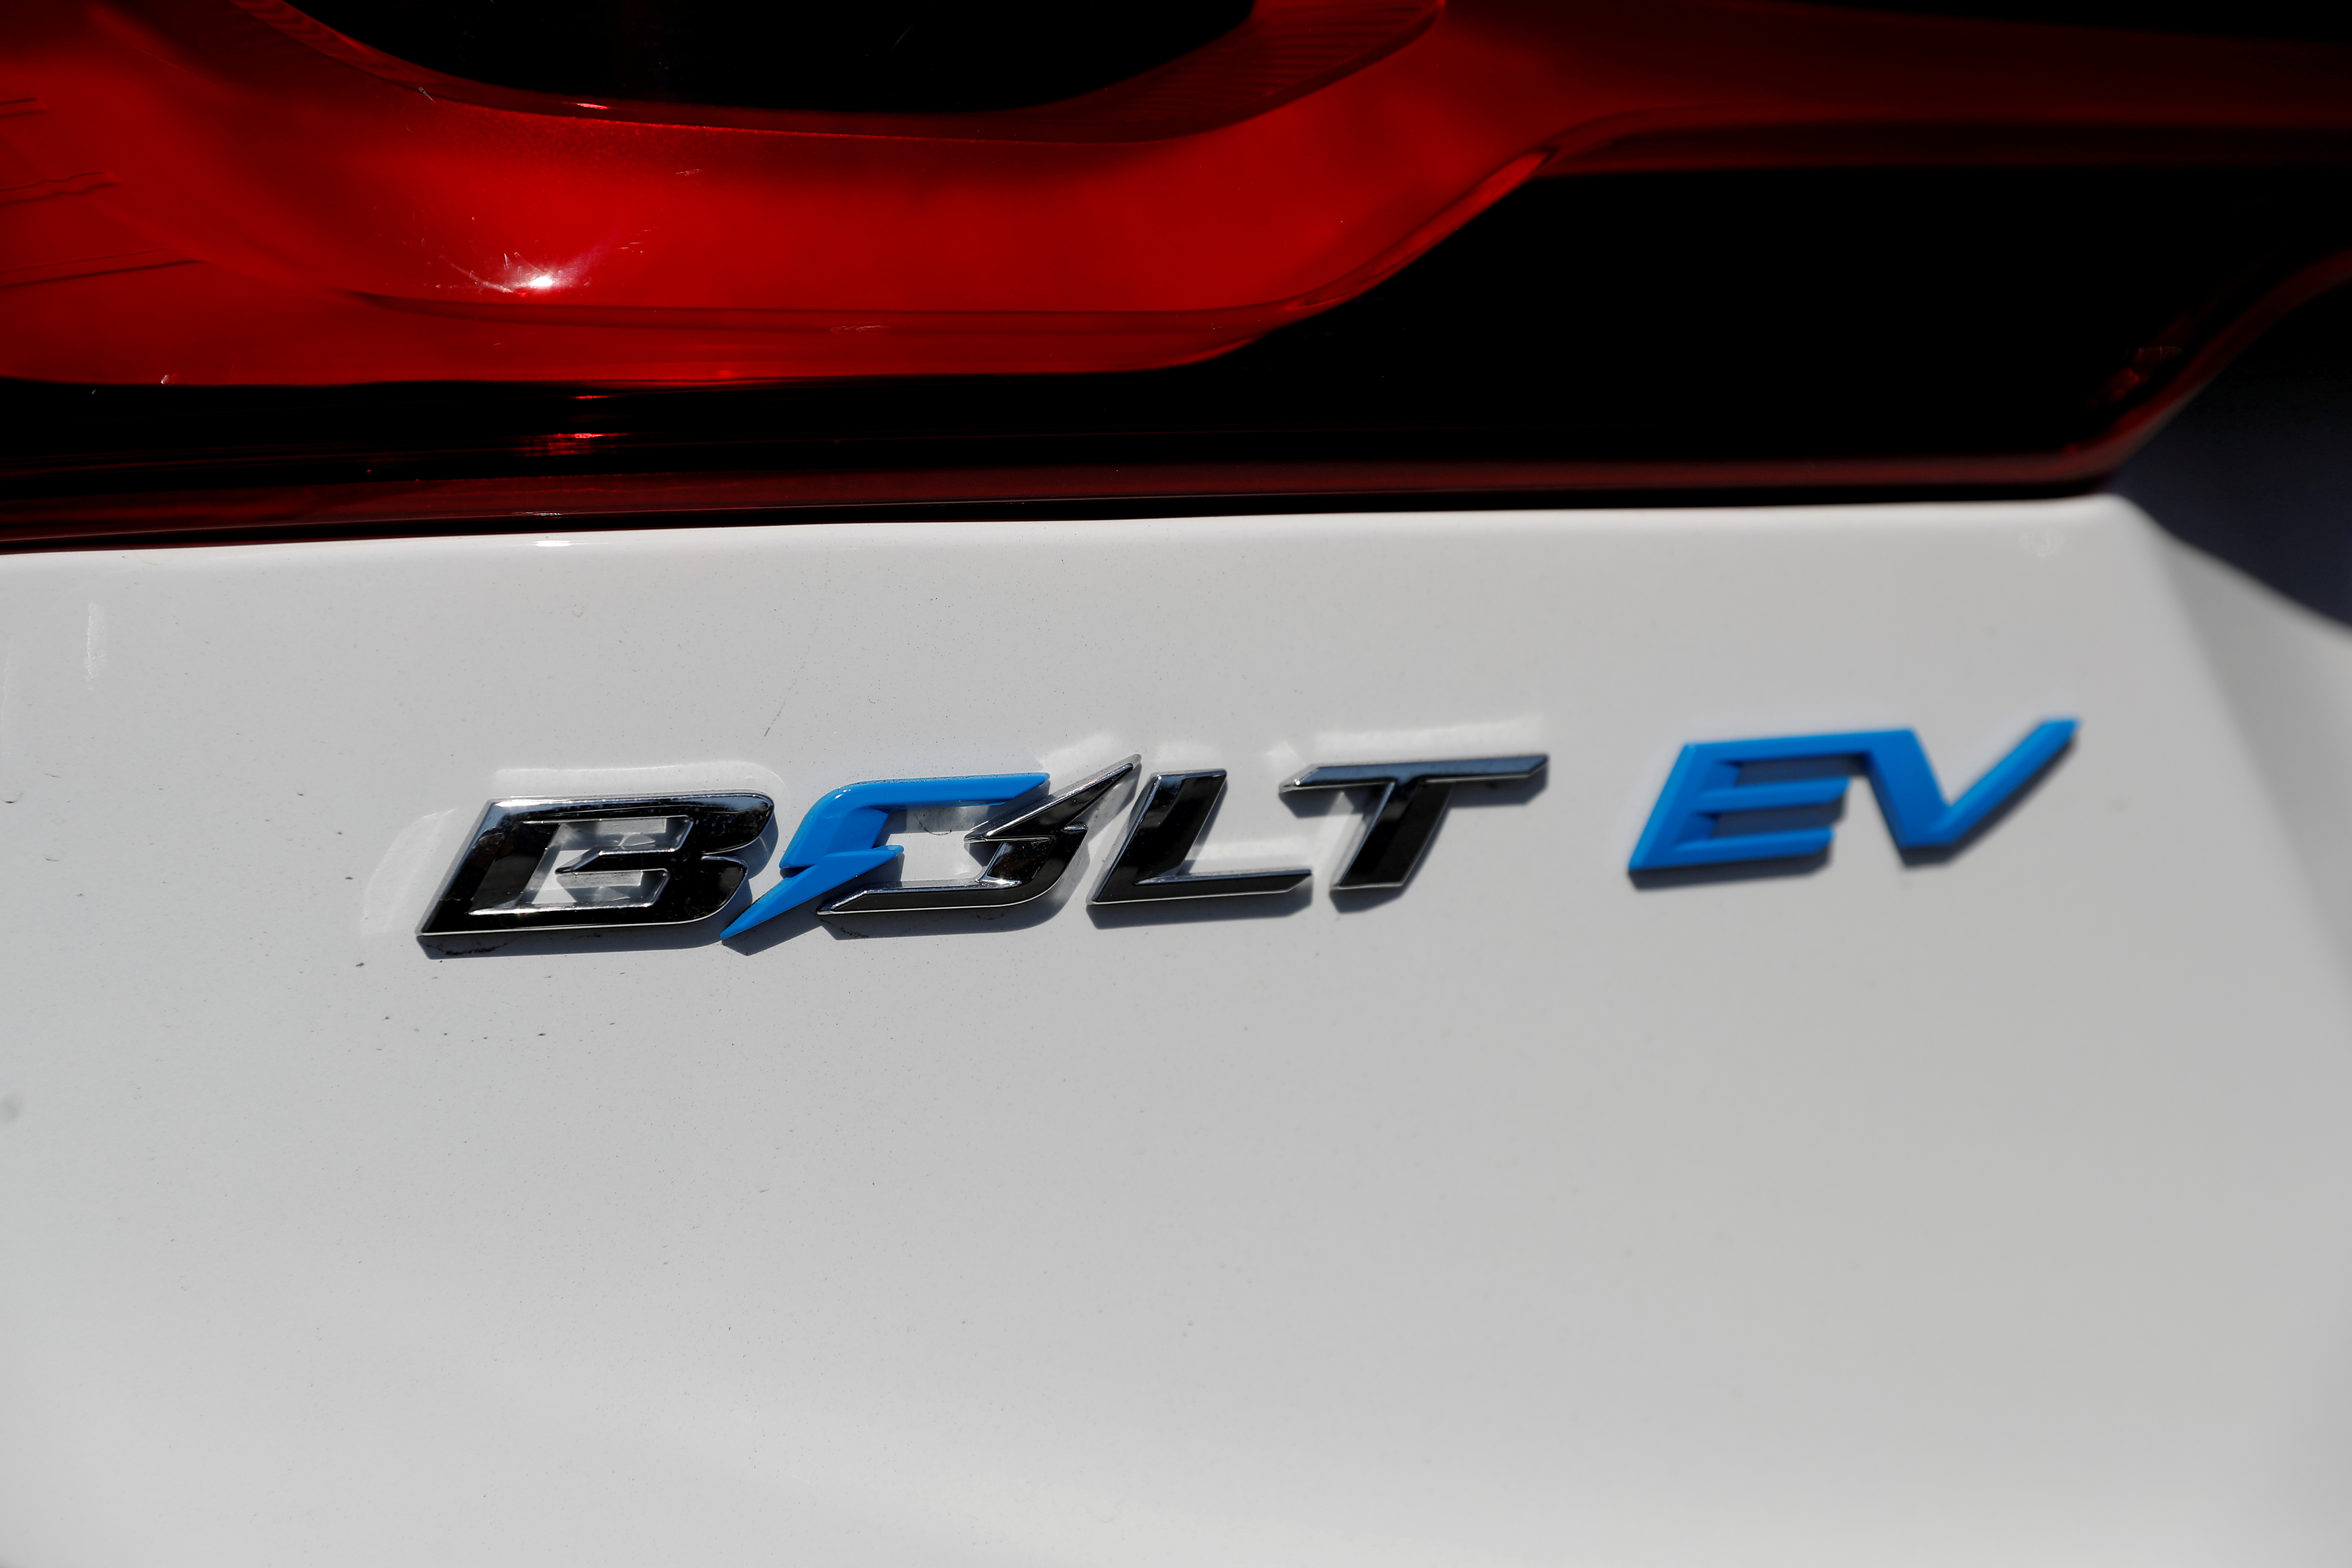 A close-up view of the Chevrolet Bolt electric vehicle logo is seen at Stewart Chevrolet in Colma, California, U.S., October 3, 2017. REUTERS/Stephen Lam/File Photo